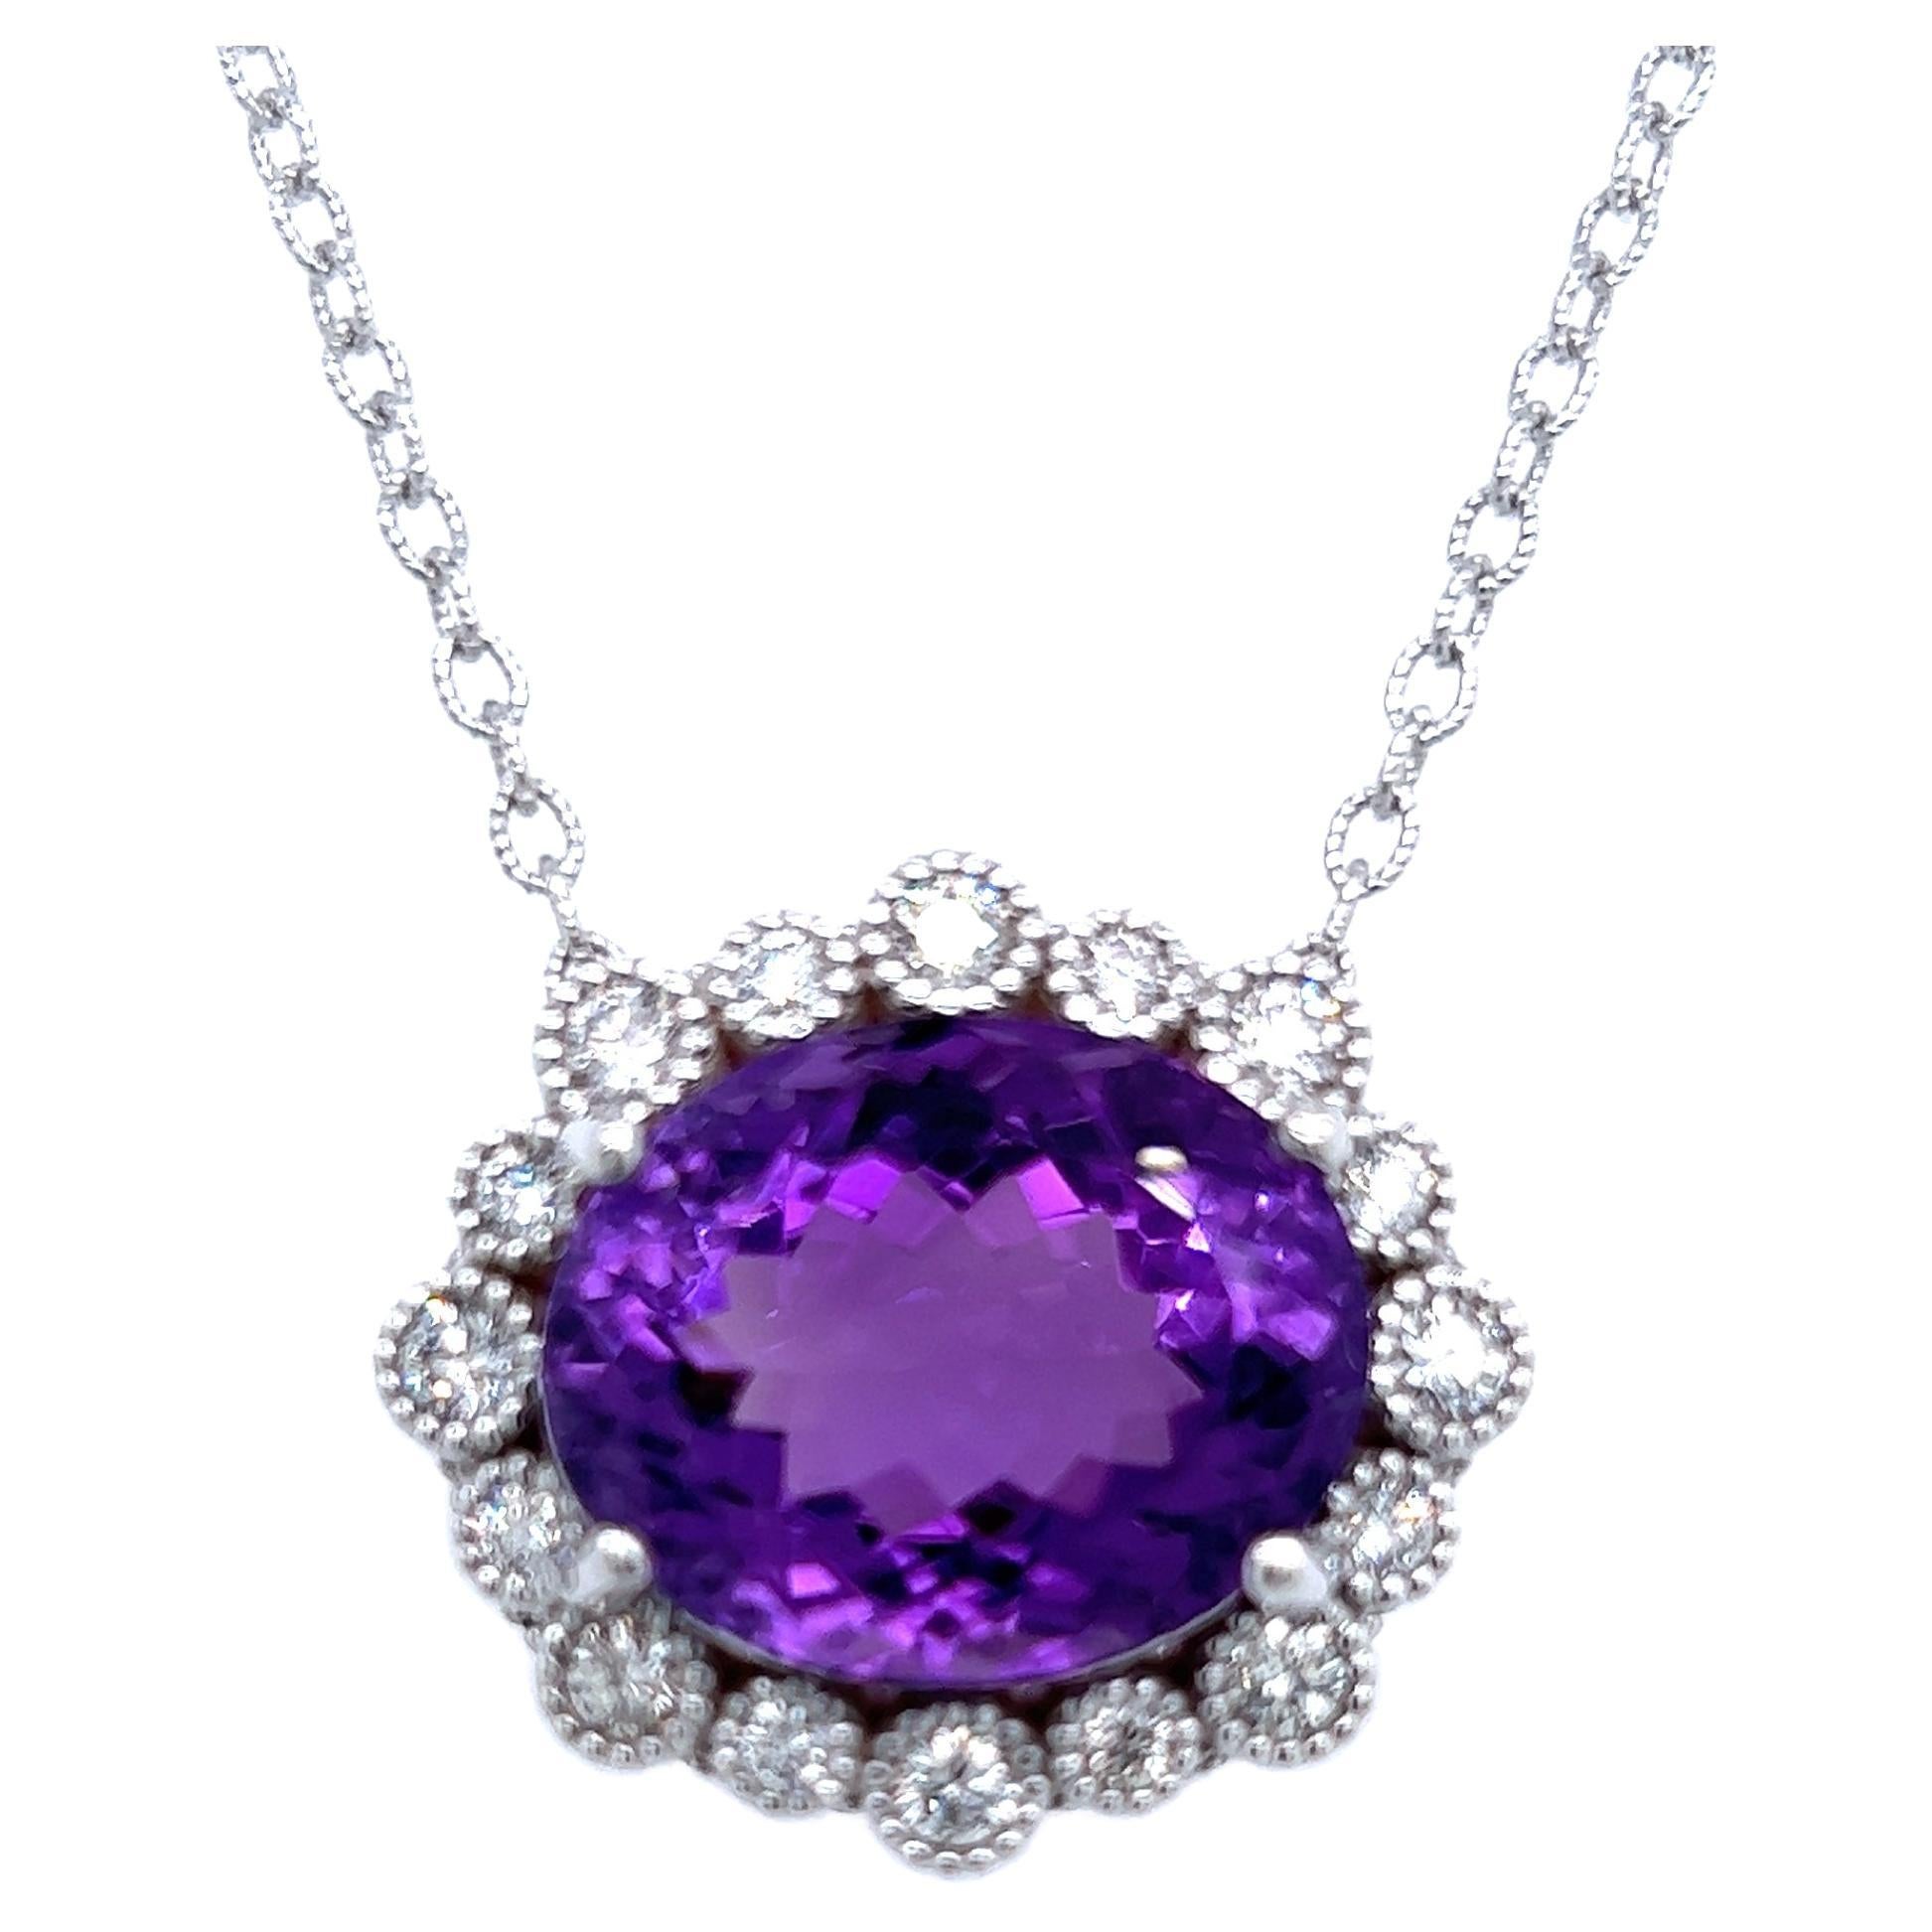 Natural Amethyst Diamond Pendant with Chain 14k W Gold 15.51 TCW Certified